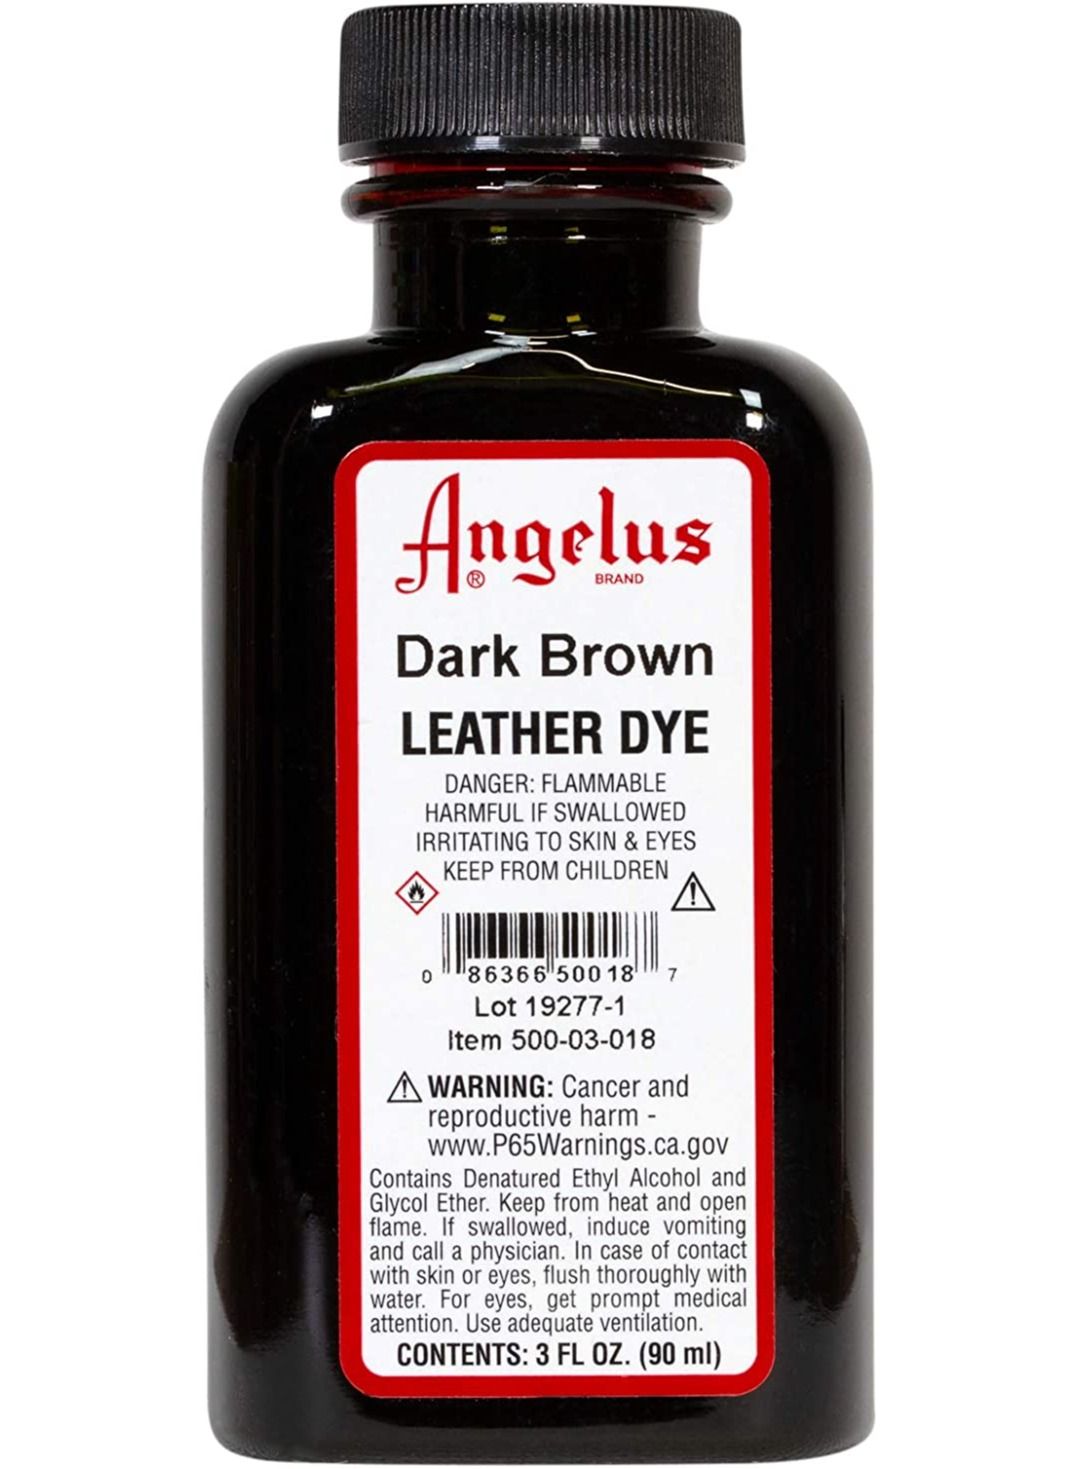 Angelus Brand Acrylic Leather Paint Matte Finisher No. 620 - 4oz - 2 Pack 